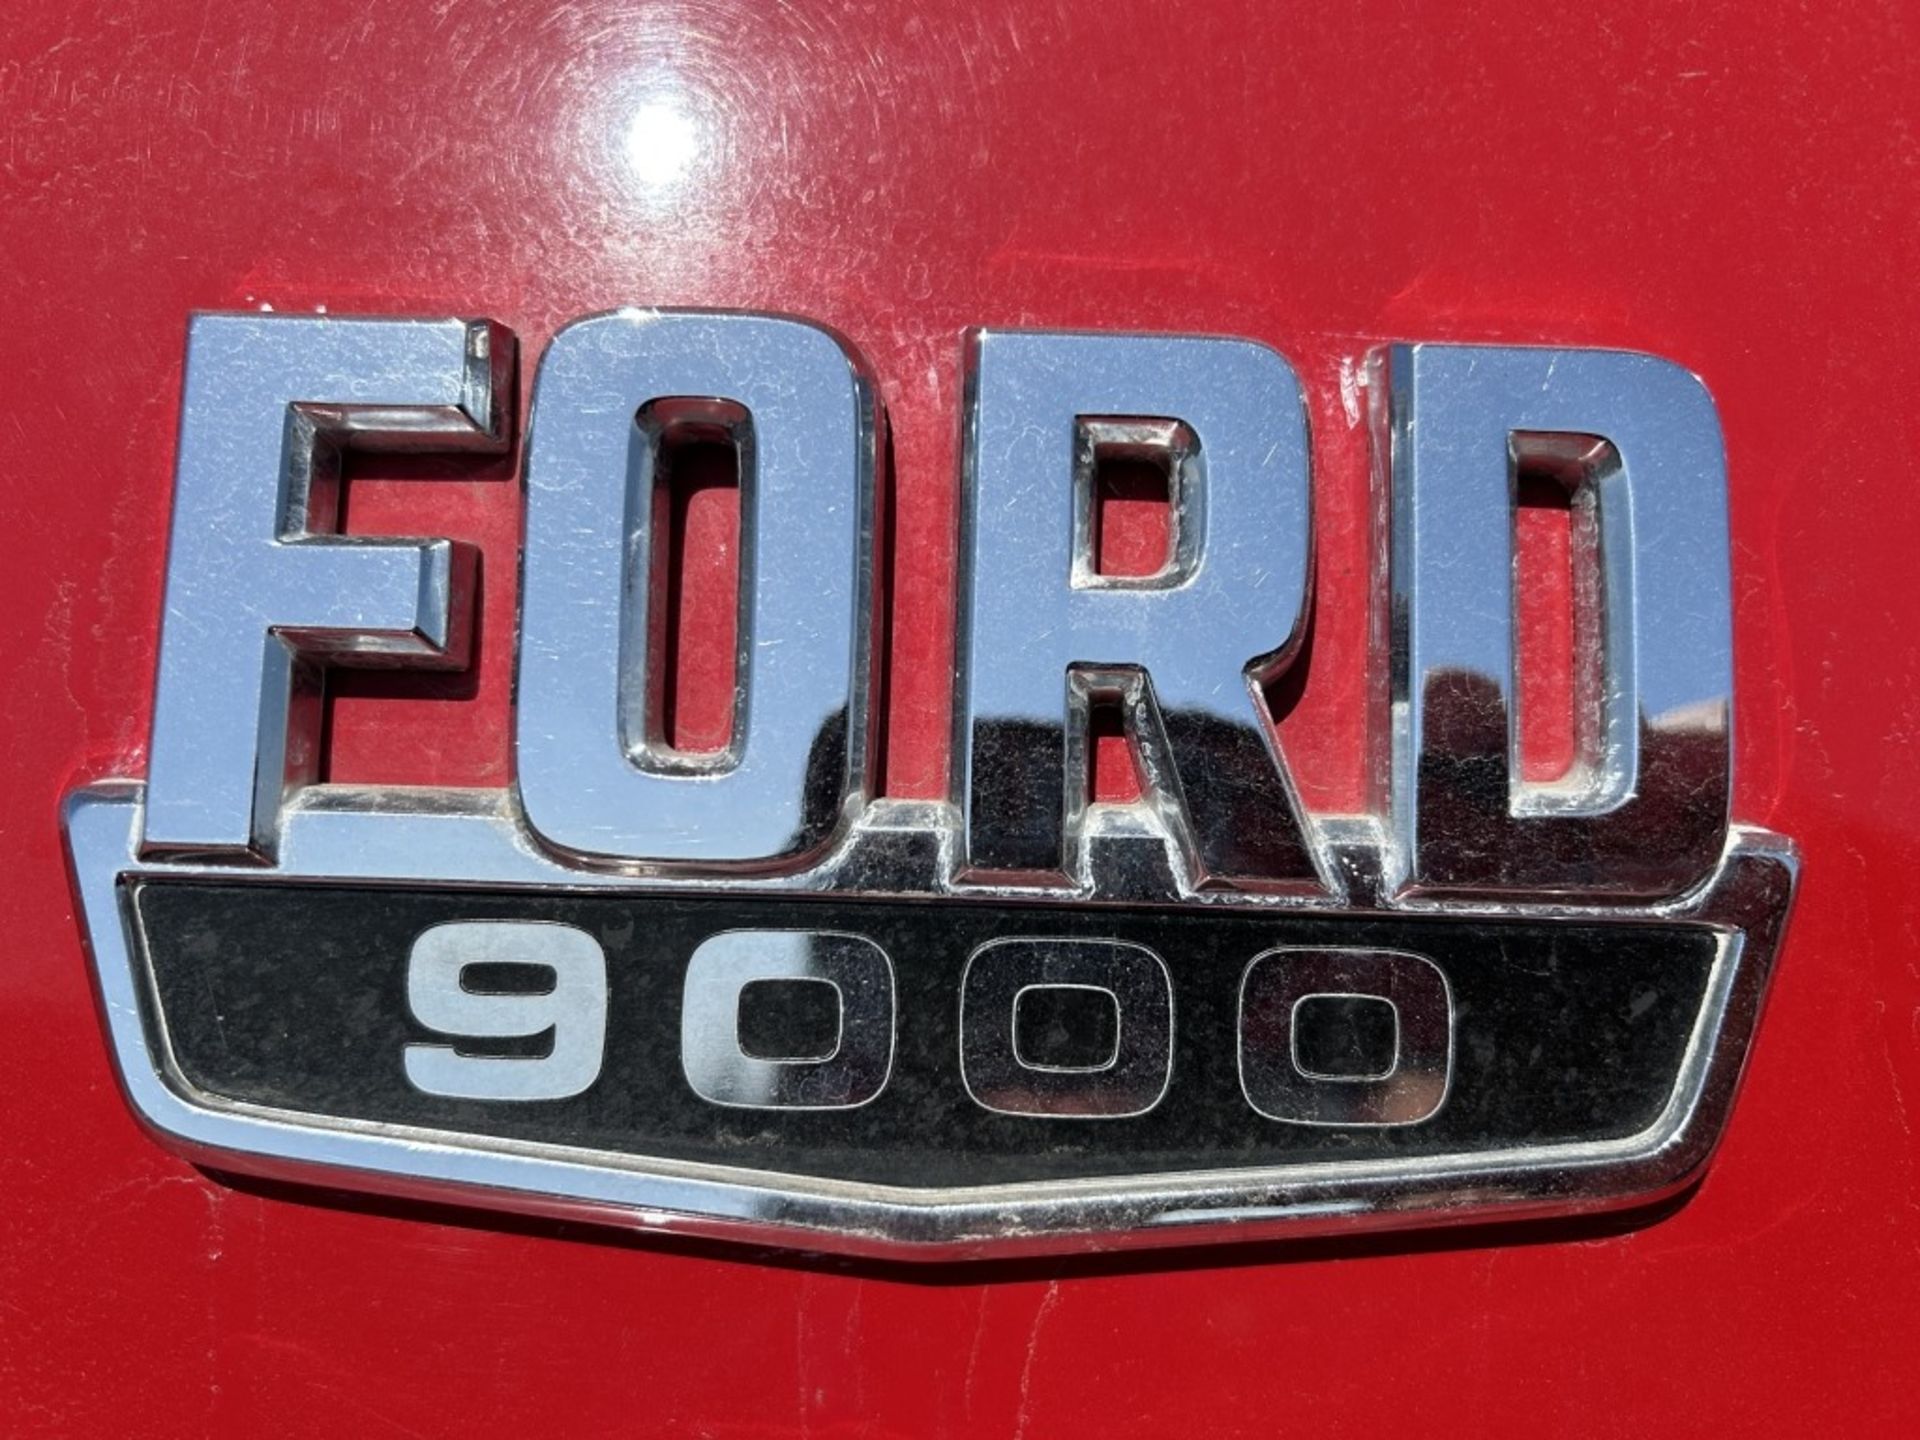 1986 Ford 9000 Fire Engine - Image 33 of 69